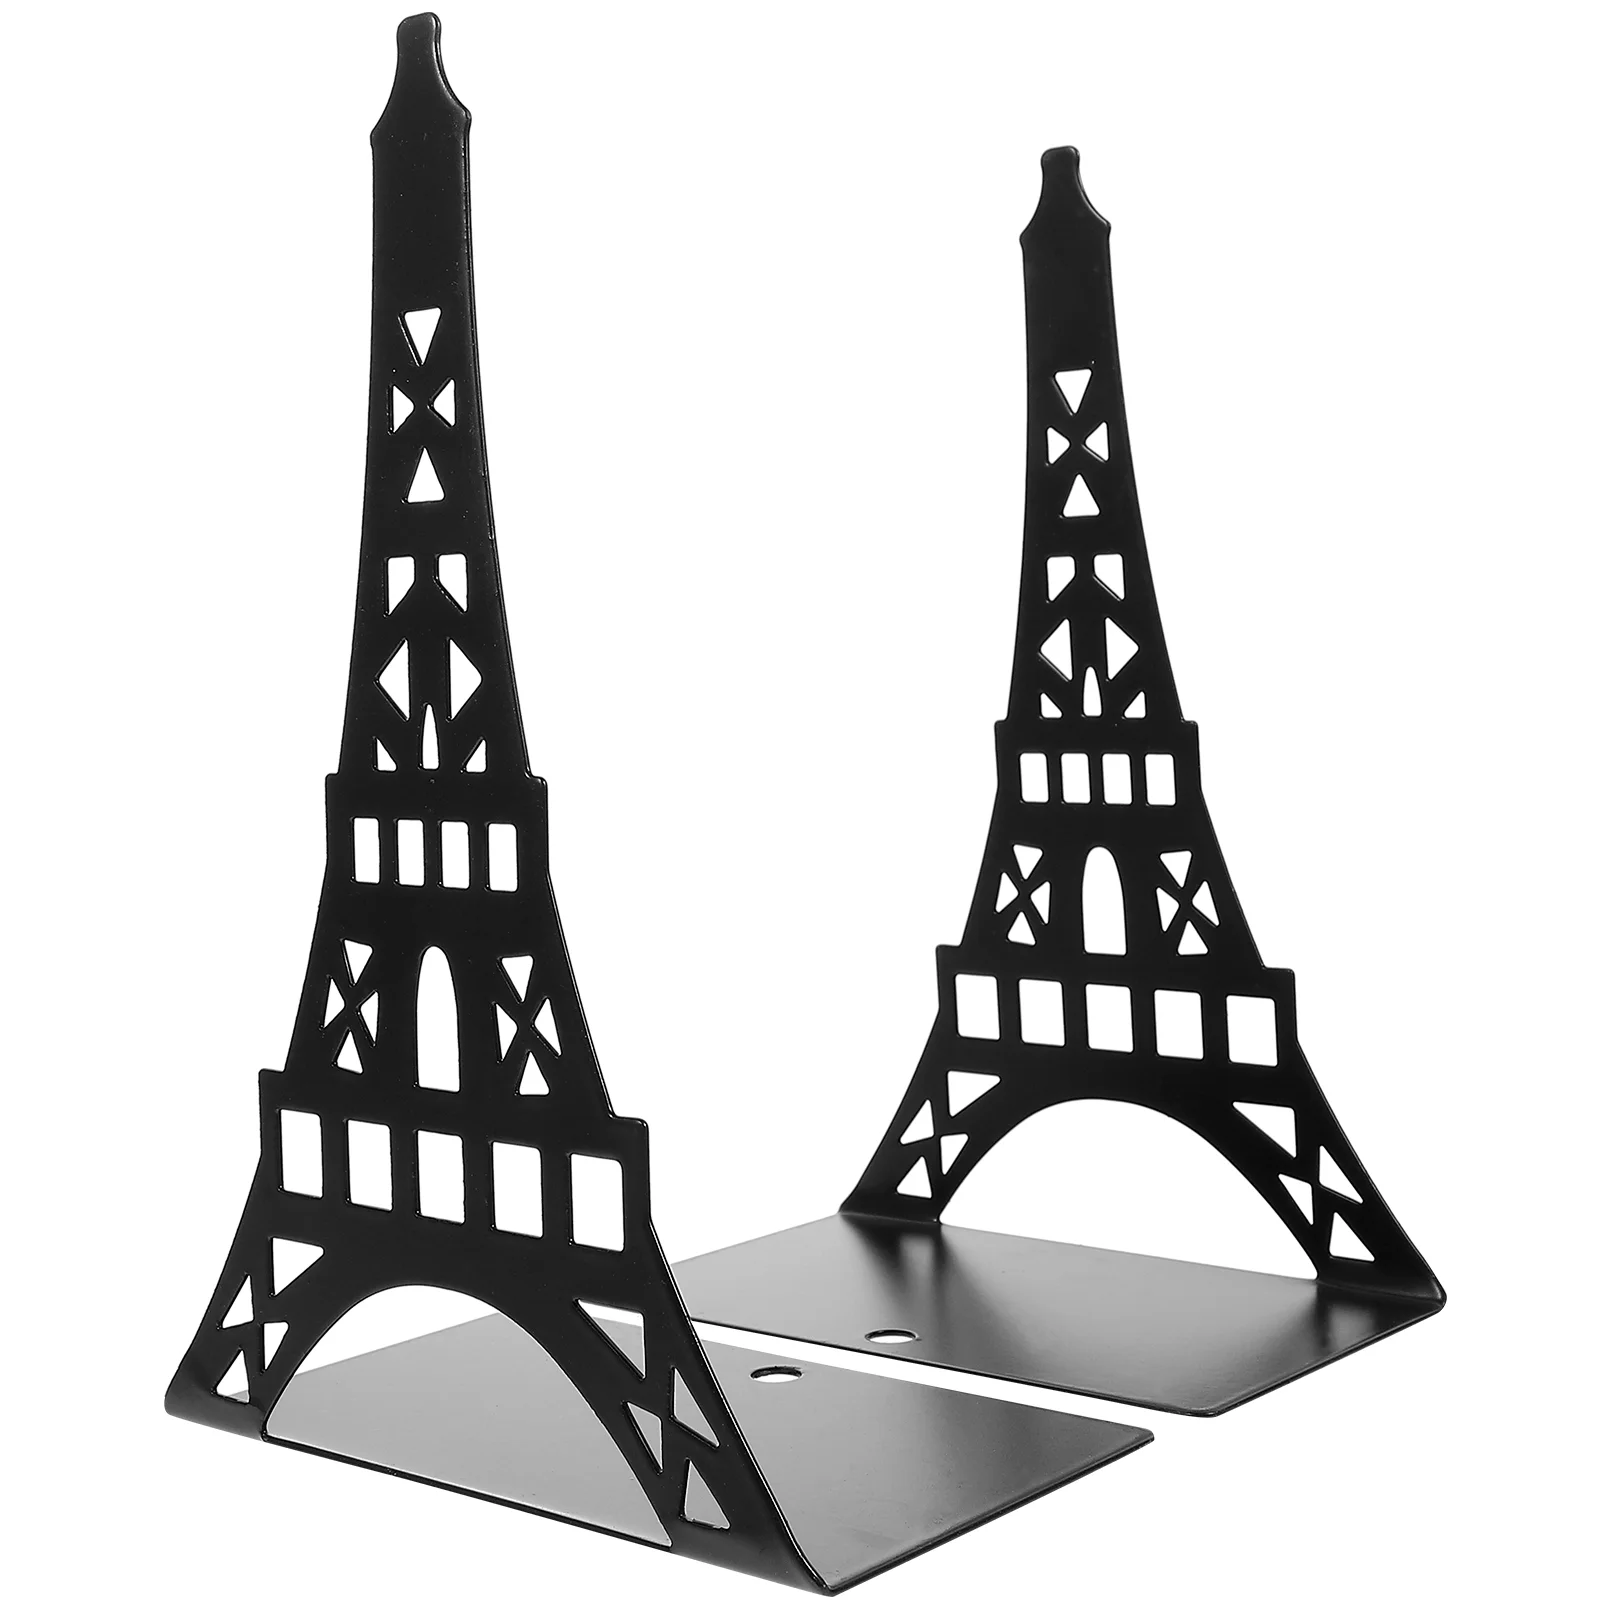 2Pcs Reusable Book Holders Tower Shape Book Holders Metal Book Ends File Book Organizer bookend tower shape ends crafted holders for shelves reusable reading organizer stands file kids room